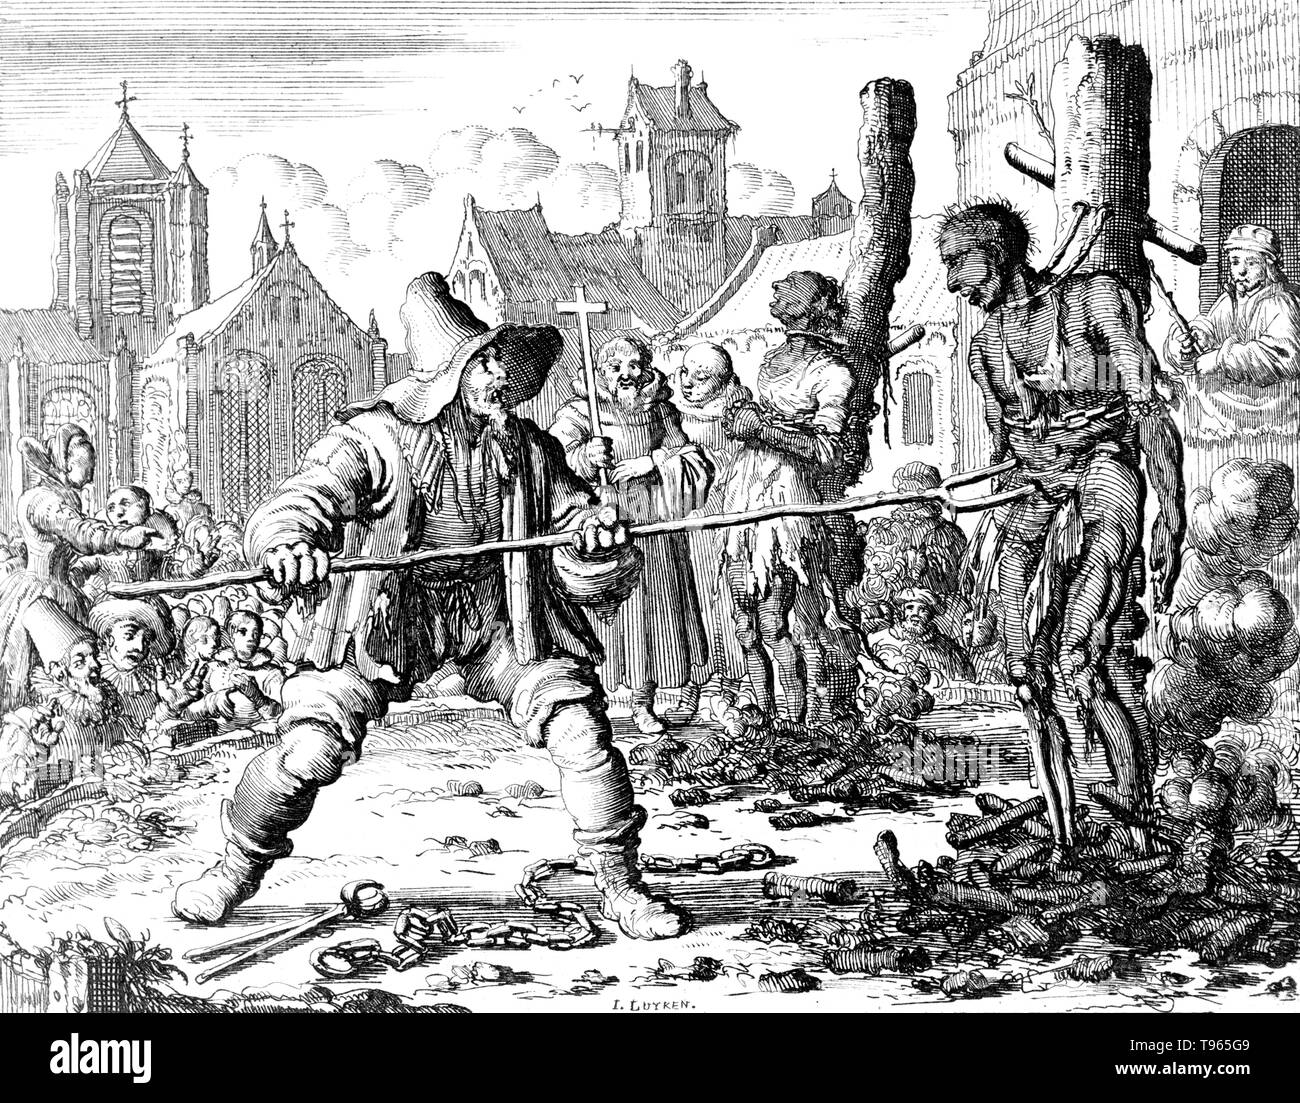 David van der Leyen (or Verleyen), an Anabaptist martyr, was executed with Levina Ghyselius at Ghent, on February 14, 1554 by burning at the stake. The first information we have about these two martyrs is found in the Liedtboecxken van den Offer des Heeren (1562) where they are celebrated in a song (No. 7) beginning: 'Ghy Christen al te samen, bereyt u tot ten strijt' (You Christians all together, prepare for the conflict). It is also included by Wolkan. Stock Photo